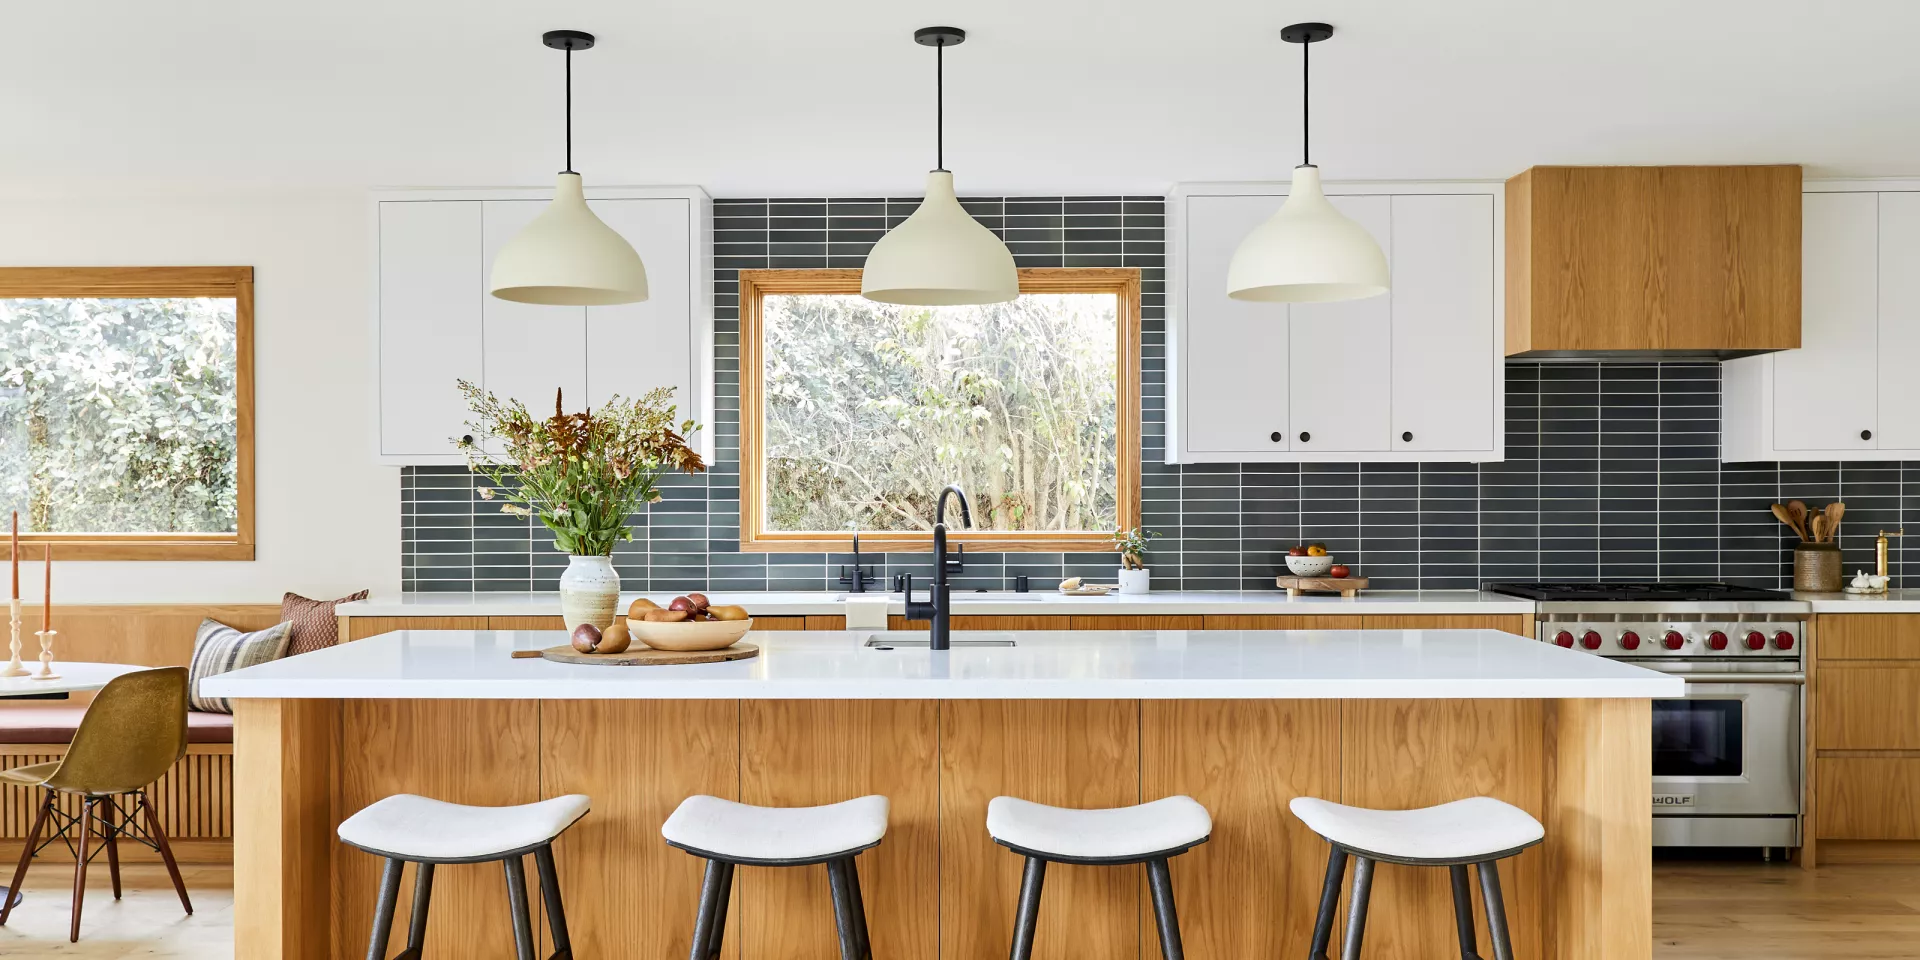 Kitchen Lighting Ideas: Lighting Your Culinary Space with Style